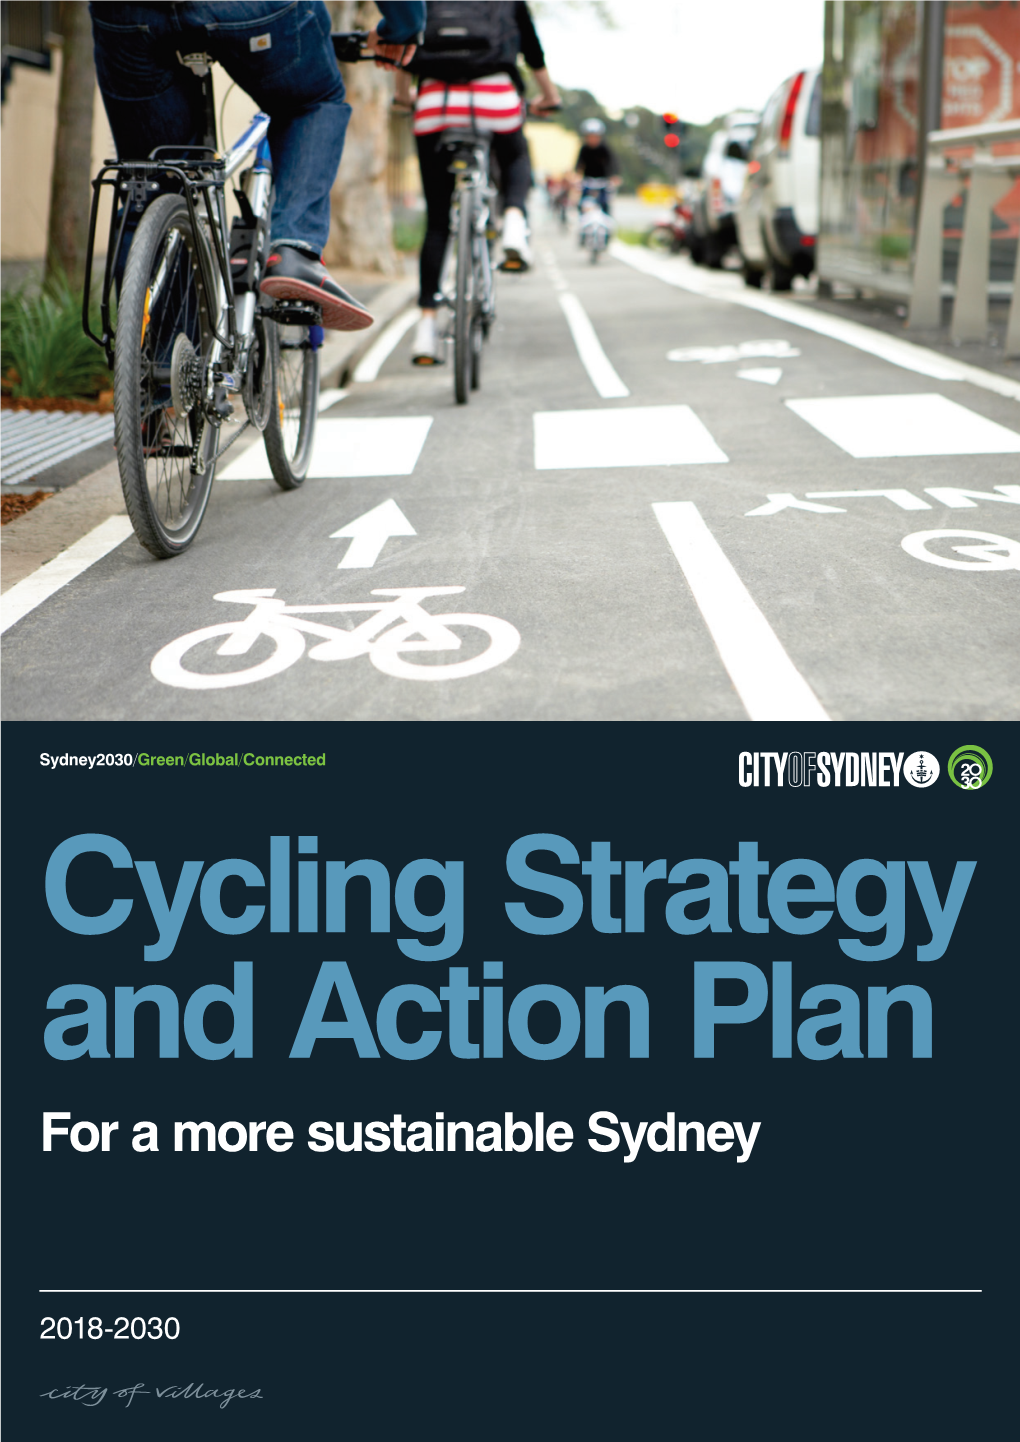 Cycling Strategy and Action Plan for a More Sustainable Sydney